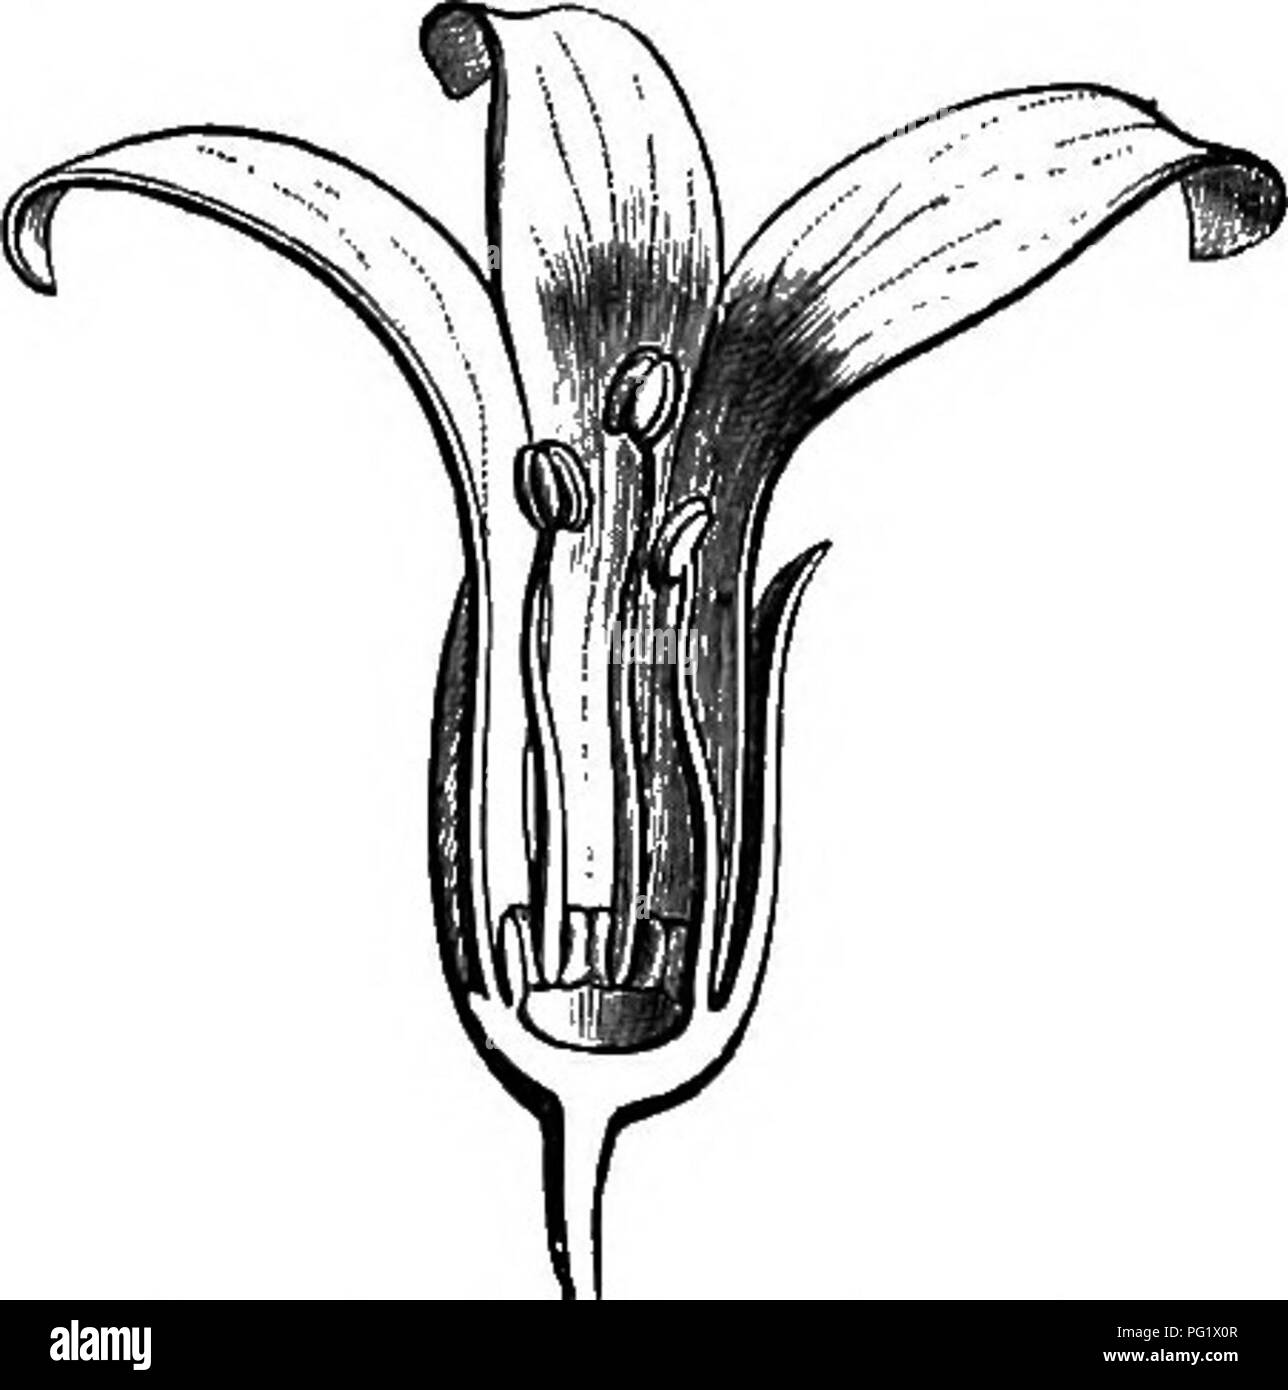 . The natural history of plants. Botany. Fig. 308. Male flower (|). Kg, 309. Longitudinal section of male flower. but they are attached by the edges and not by their mesial lines. The calyx is imbricate, like the petals which are persistent and grow around the base of the fruit., Melanorrhcea, consisting of trees from Malacca and Birmah, has also petals growing round the fruit; but this is a pedicellate drupe, and not sessile, like those of Swintonia, and the stamens are indefinite in number, sometimes considerable. Astronium is also very analogous to Swinhnia ; the insertion of the parts of t Stock Photo